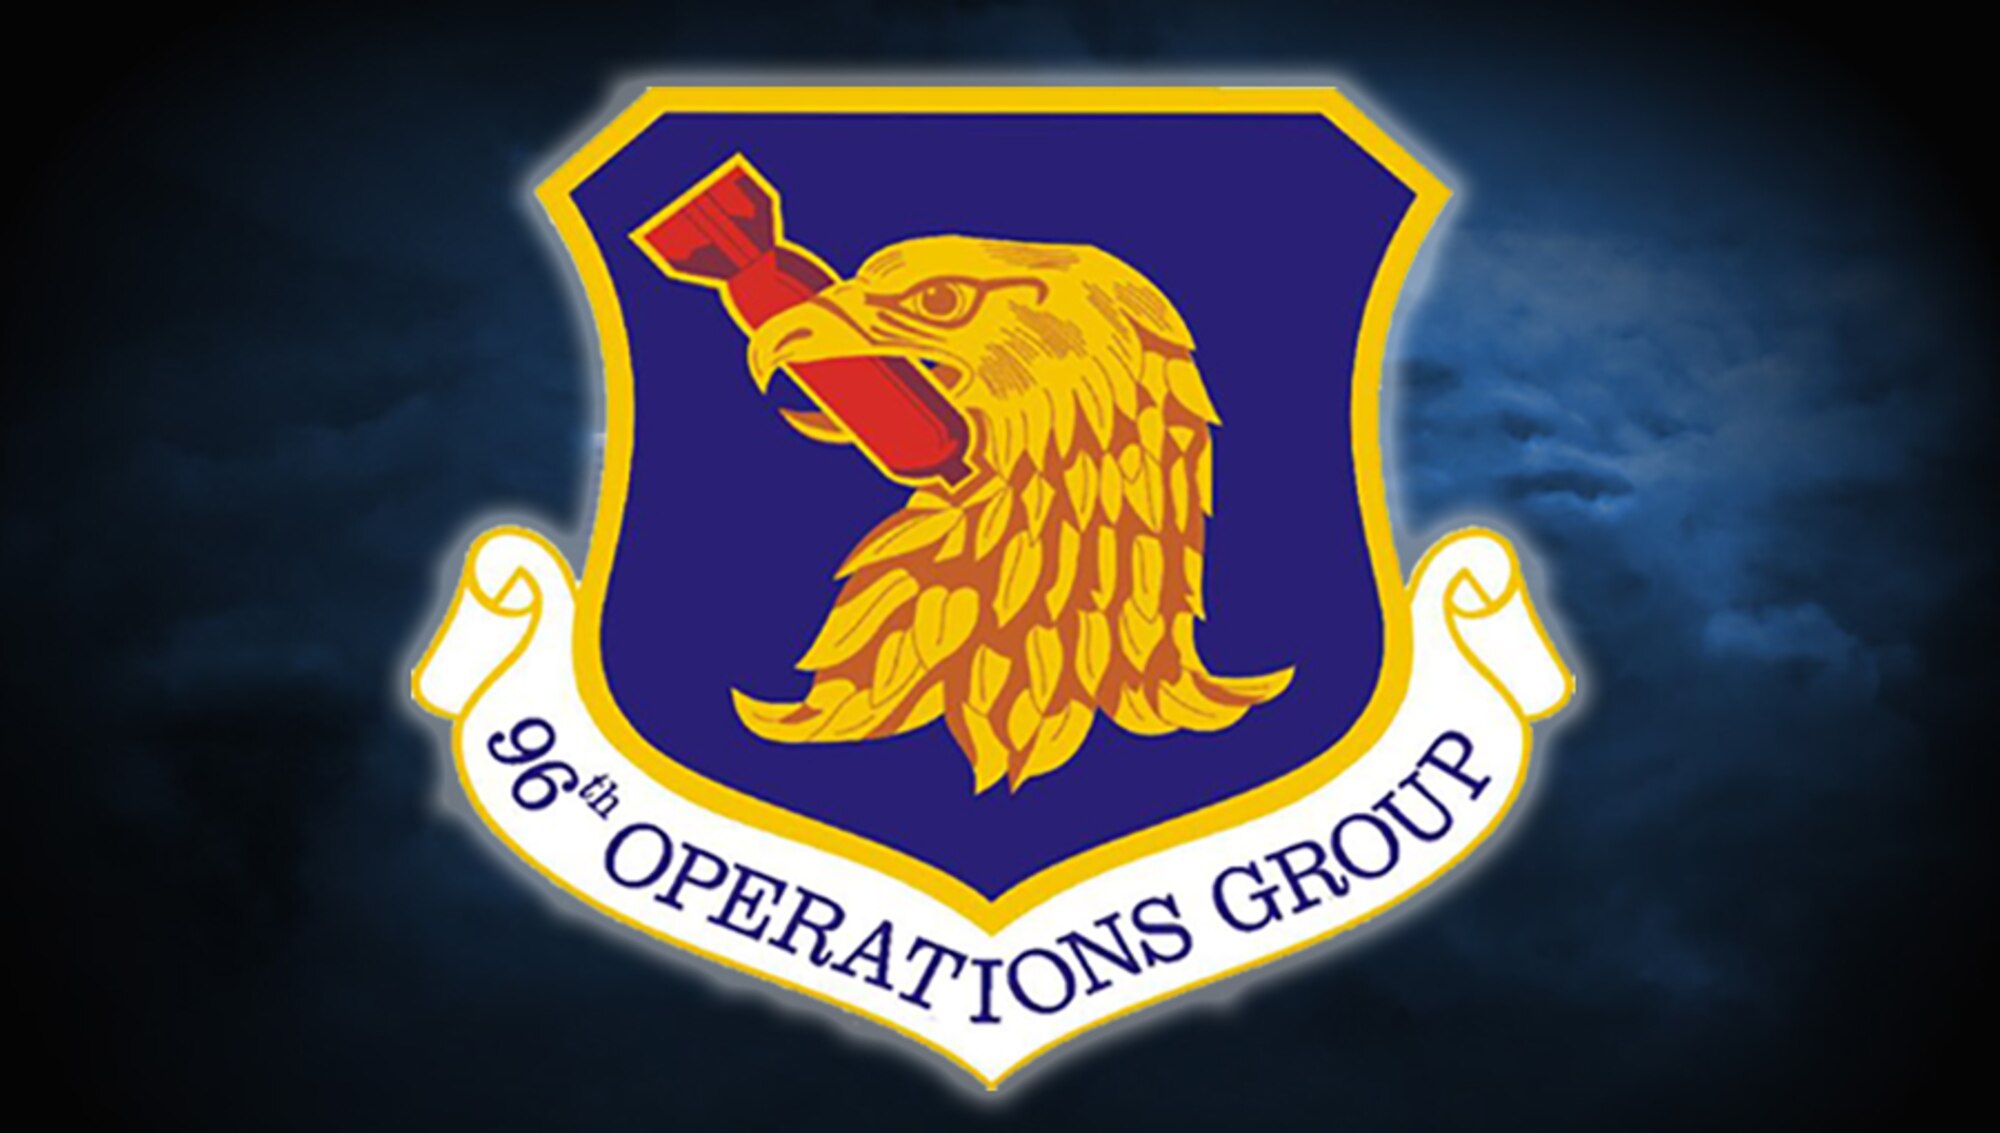 Operations Group graphic